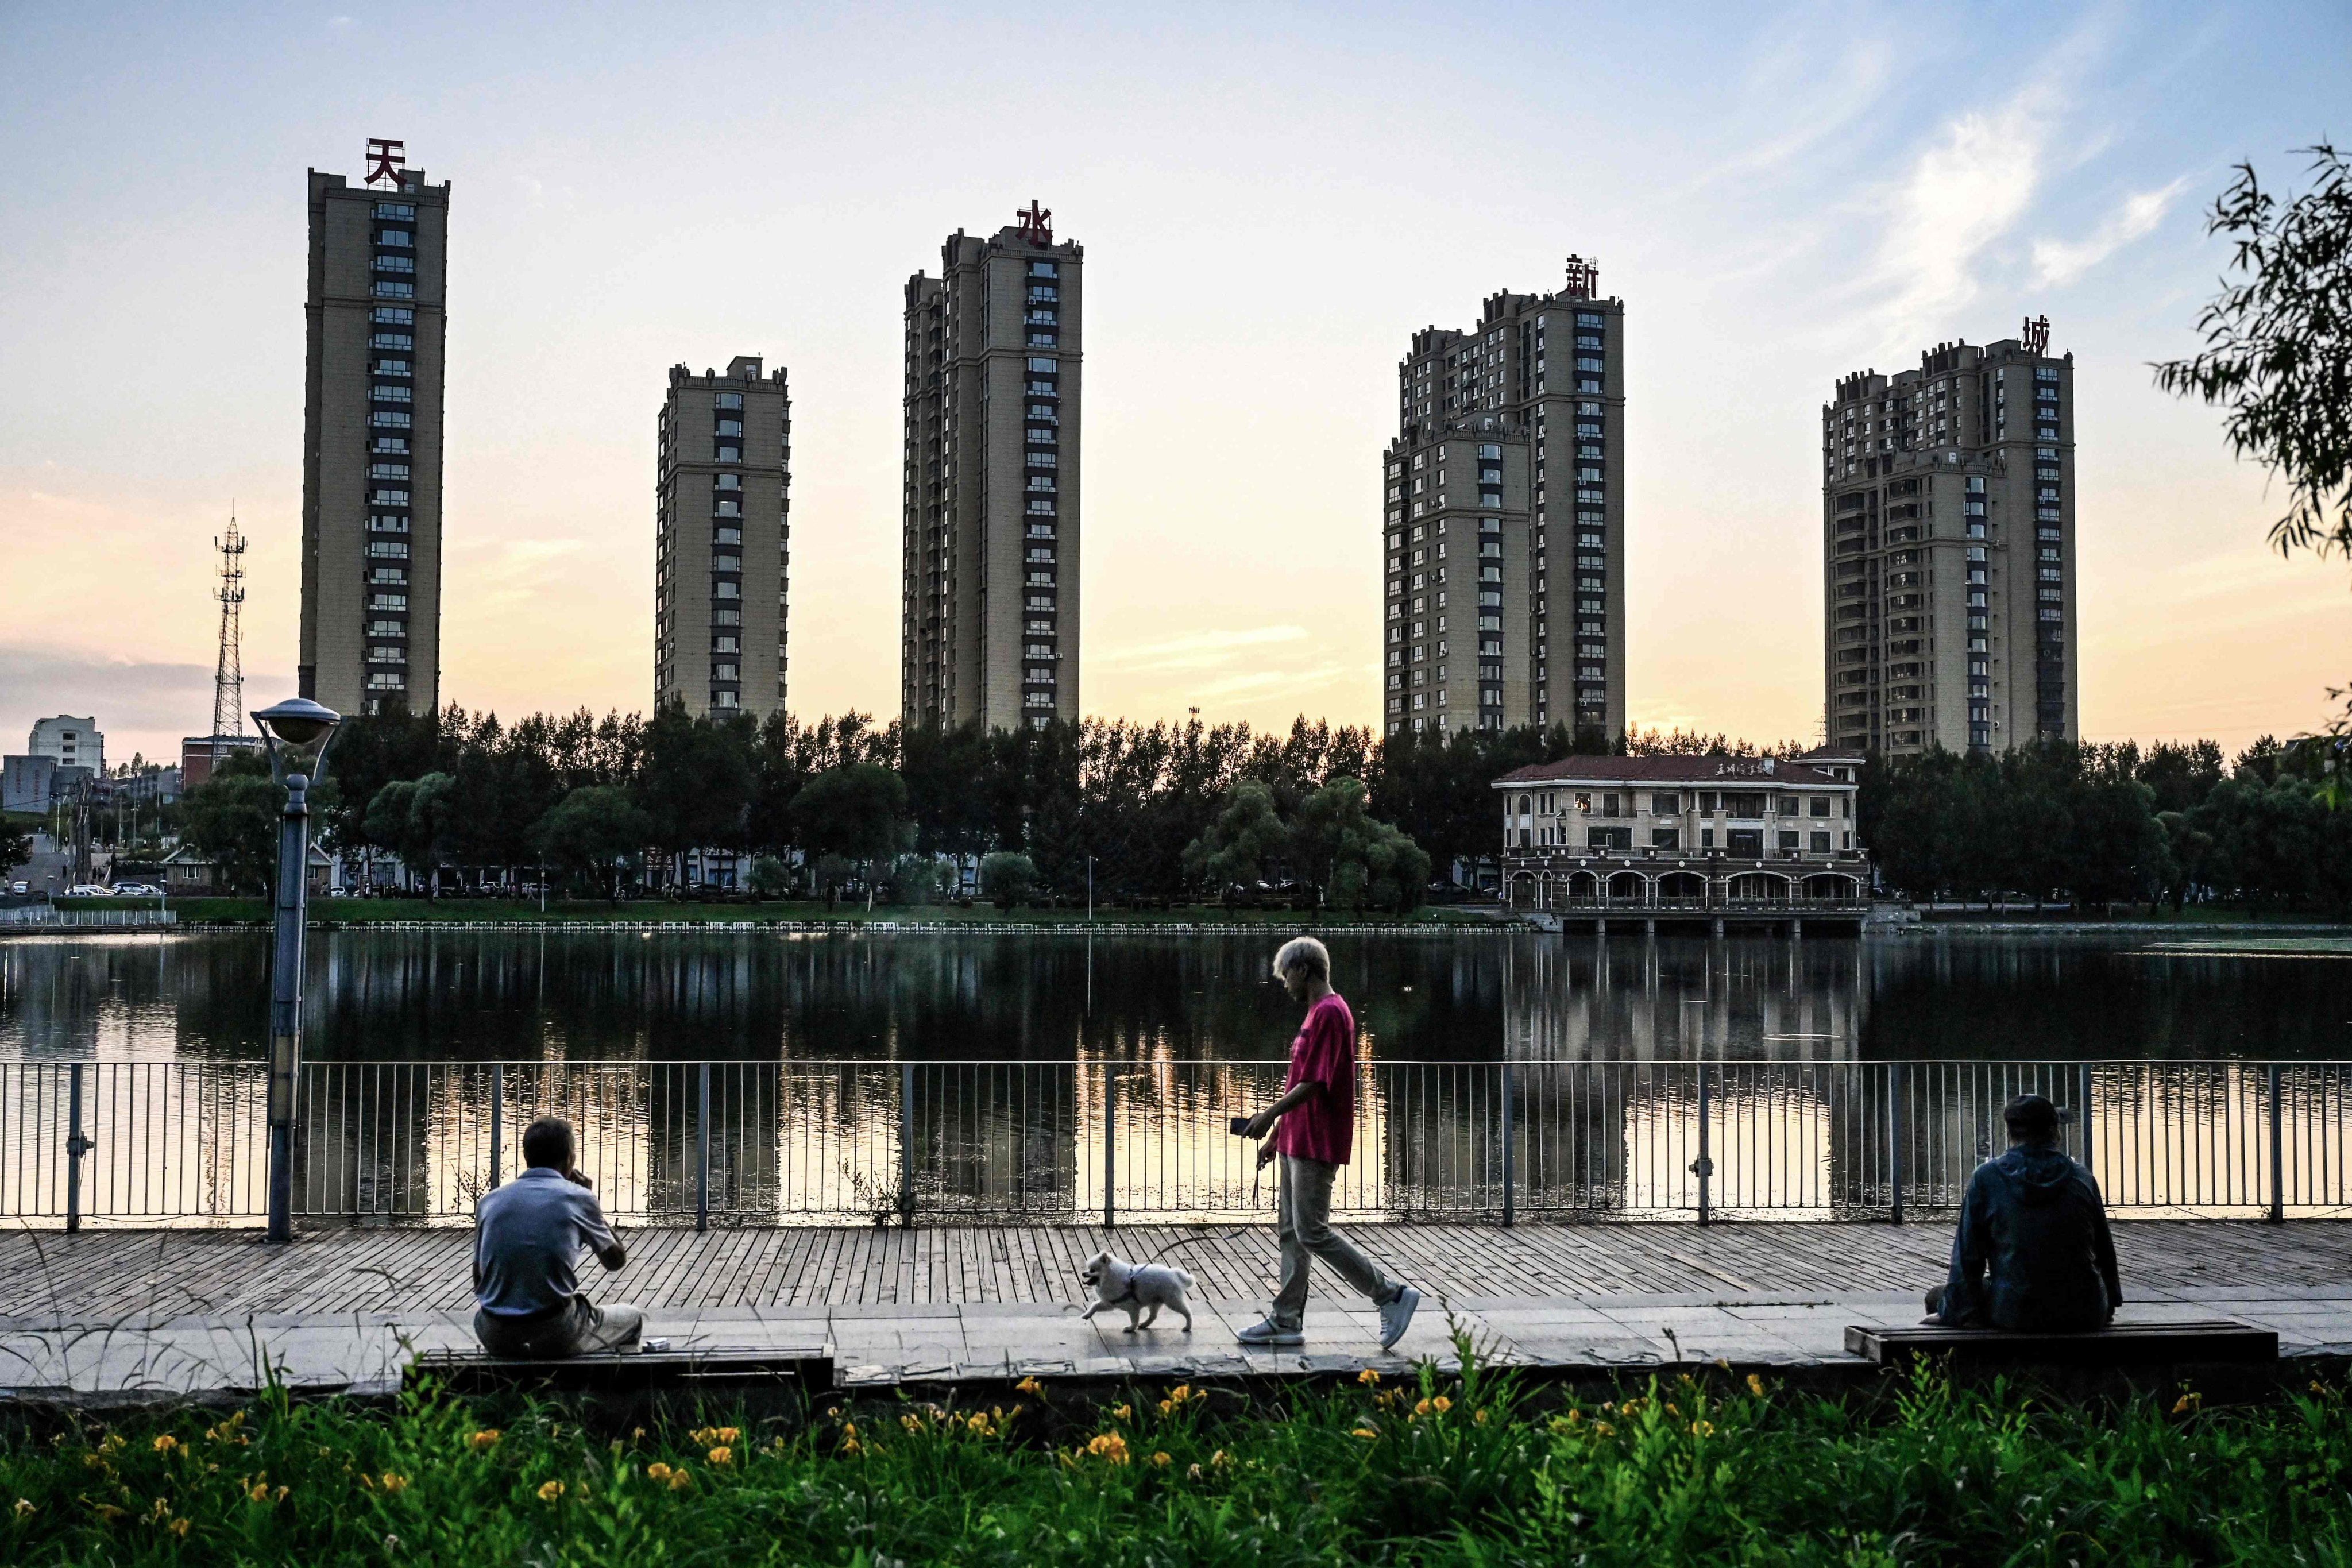 People relax by a lake near residential buildings in Hegang city in northeastern China’s Heilongjiang province on July 4. China’s real estate industry grew at lightning speed from the late 1990s, and was a major component of the country’s turbocharged economic expansion, but the market has now slumped. Photo: AFP